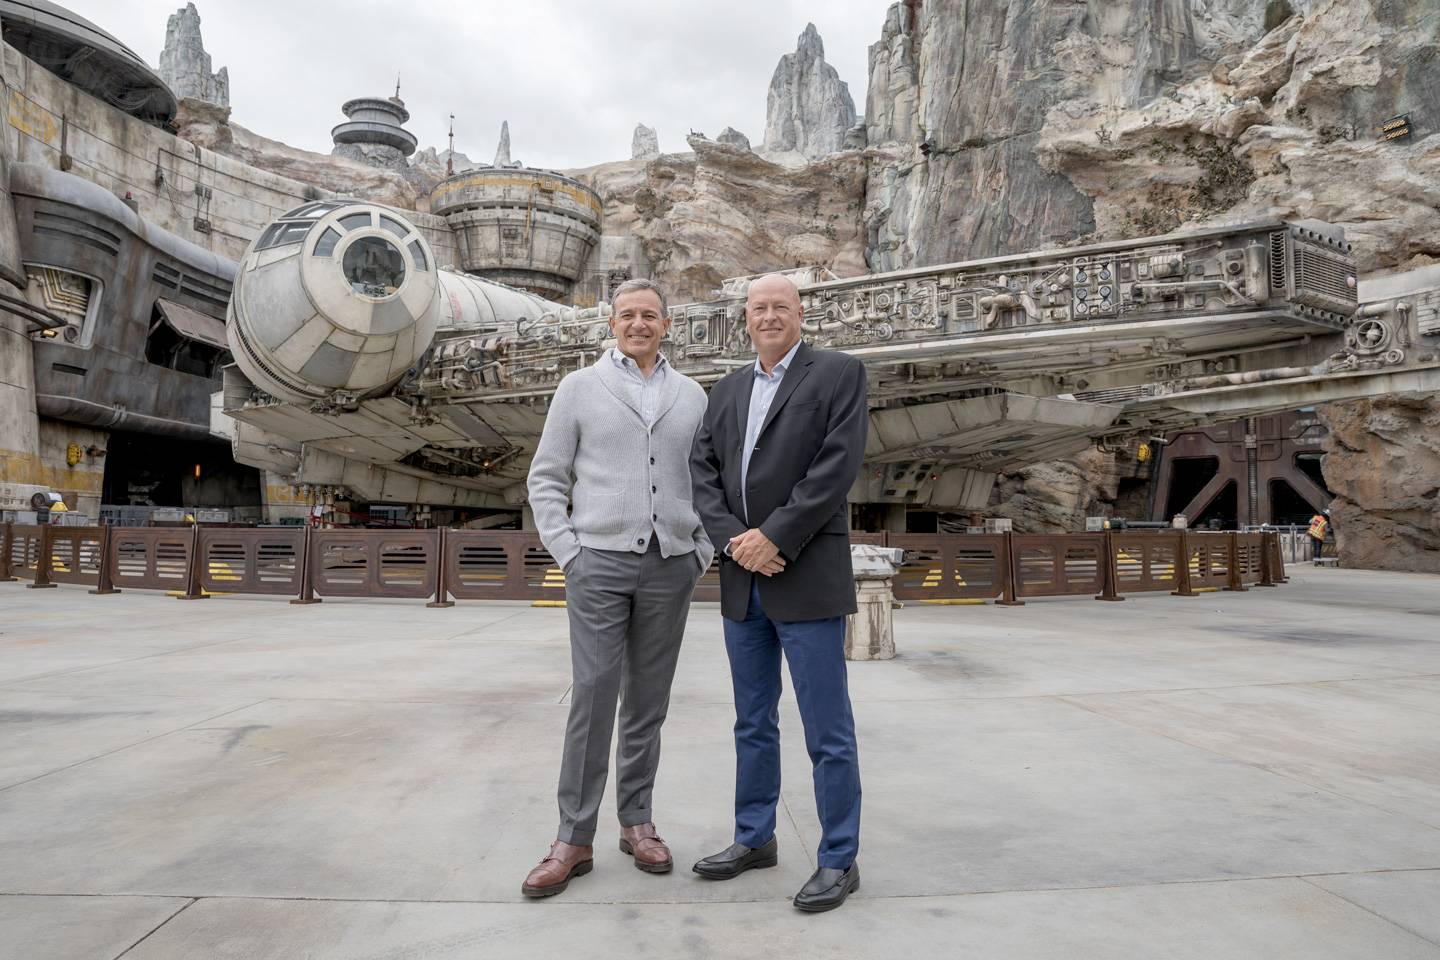 Bob Chapek (right) pictured at Star Wars Galaxy's Edge just prior to the COVID-19 shutdown that moved Disney employees to work remotely